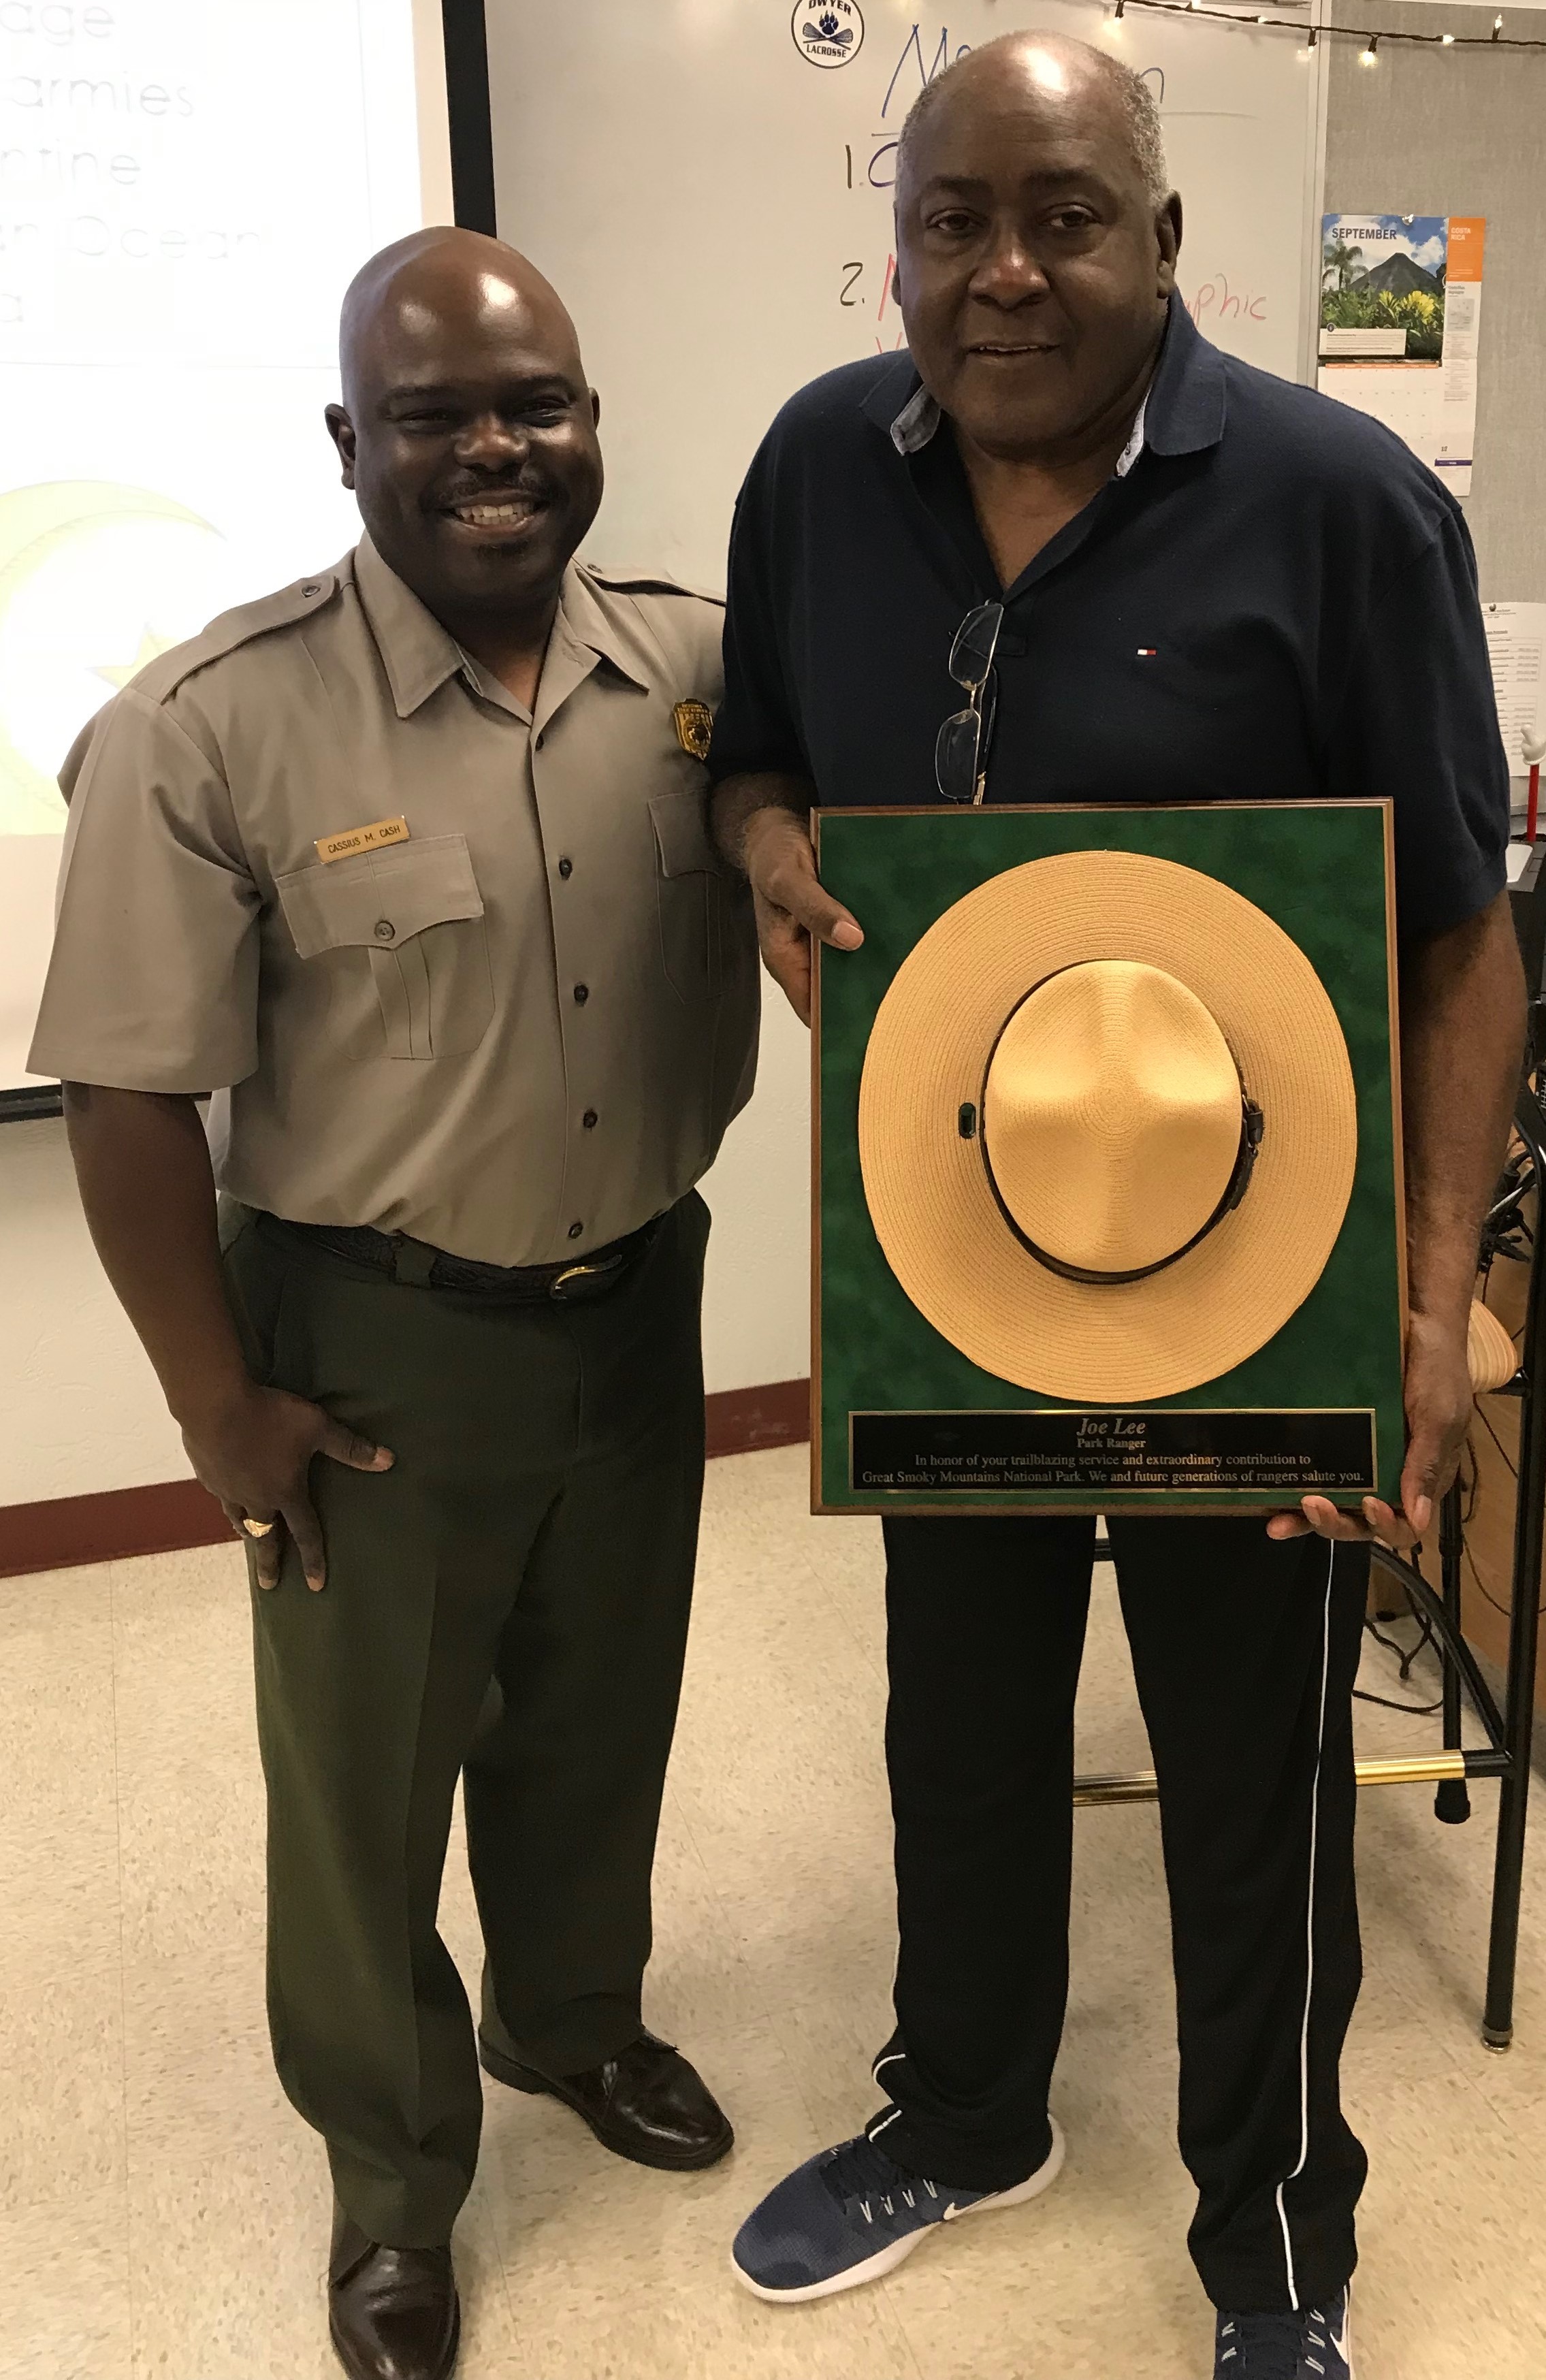 Superintendent Cash with Dr. Lee holding mounted ranger hat.